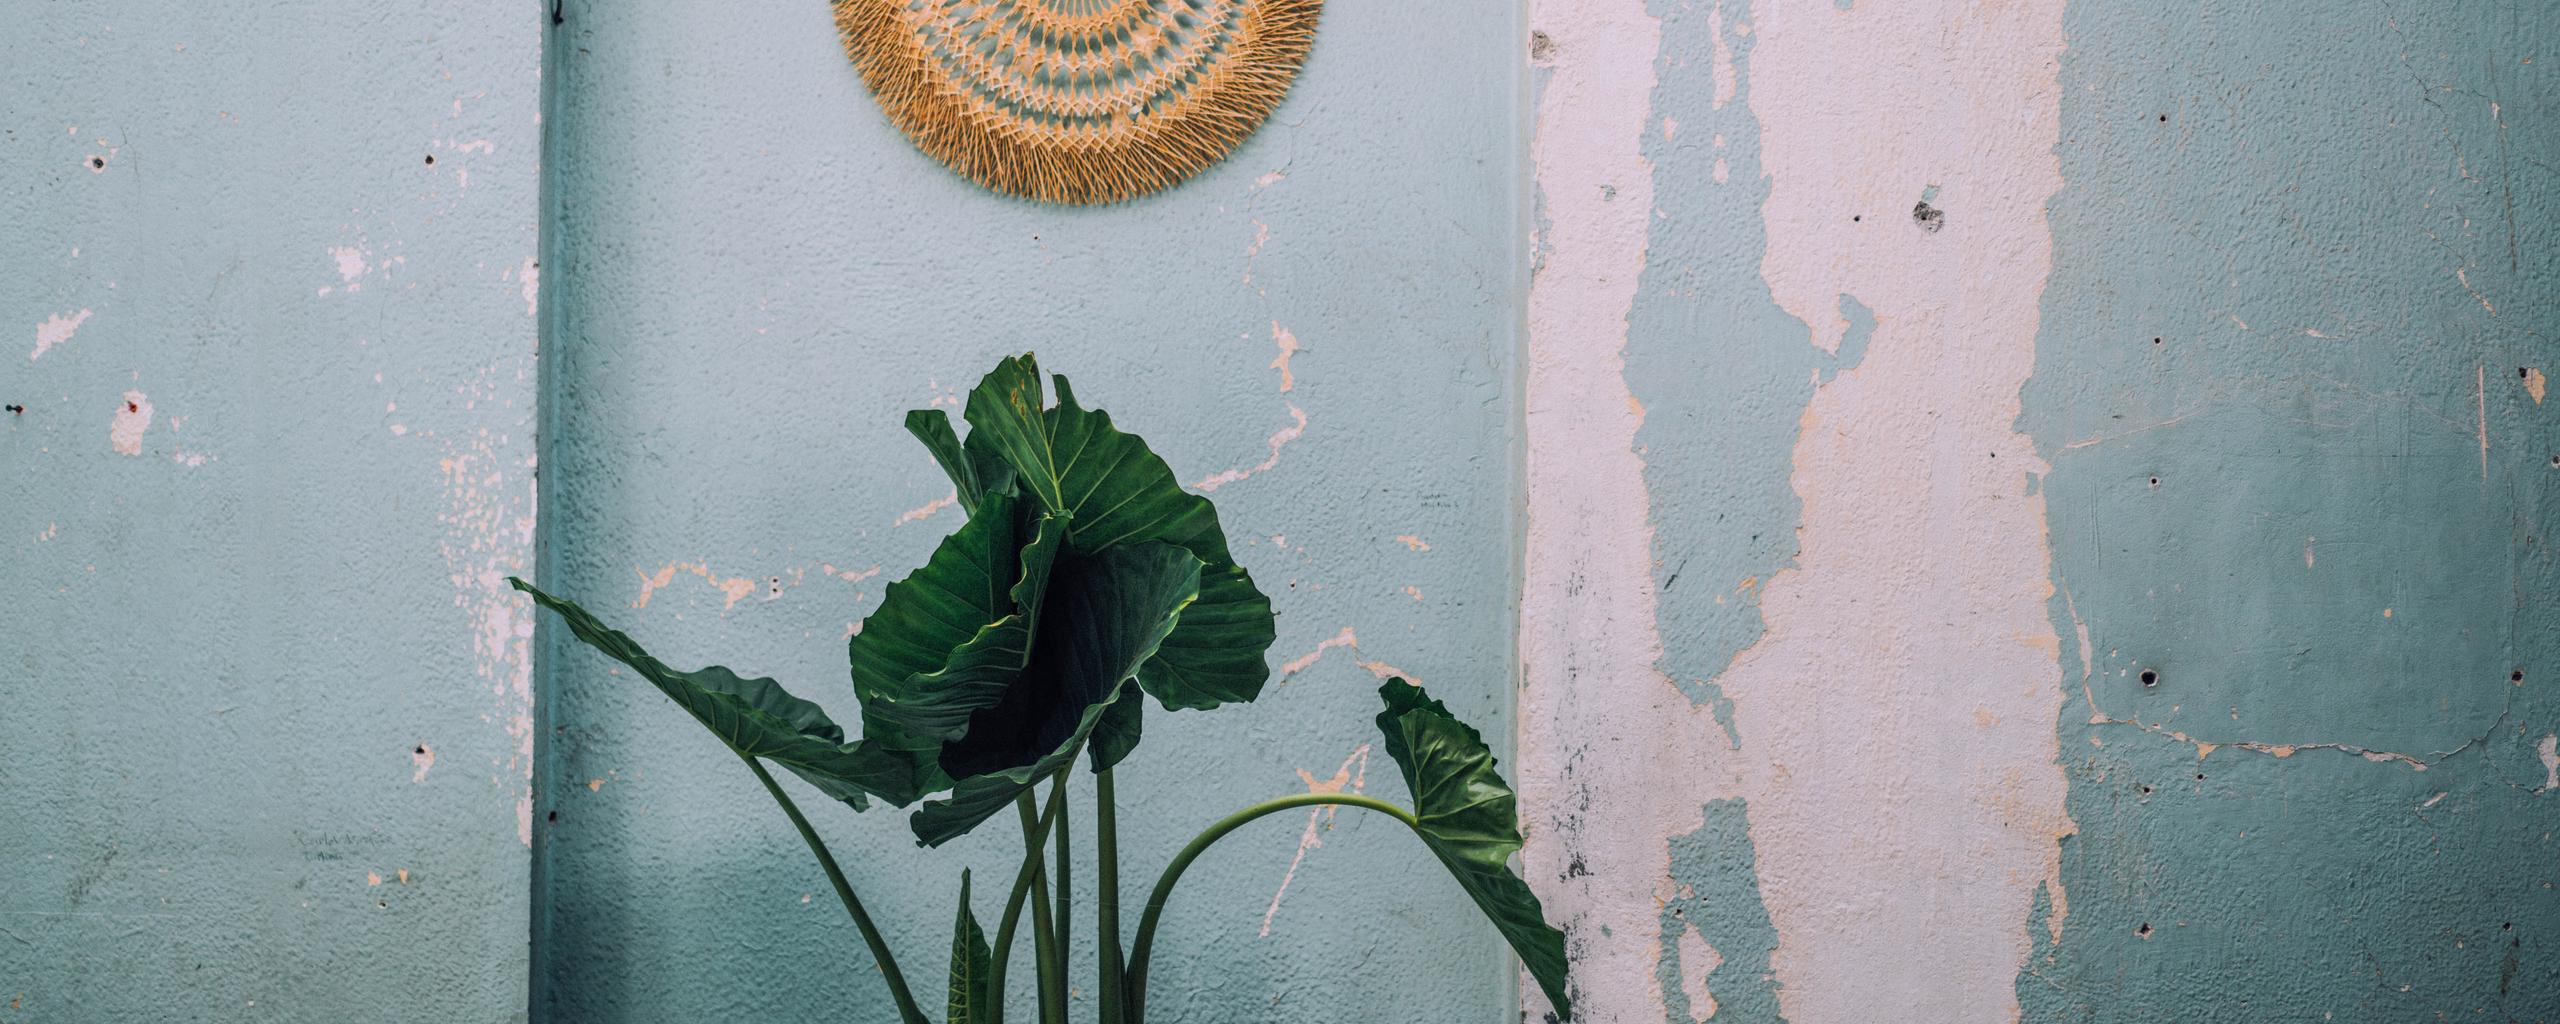 Plant and blue textured wall in Mexico City